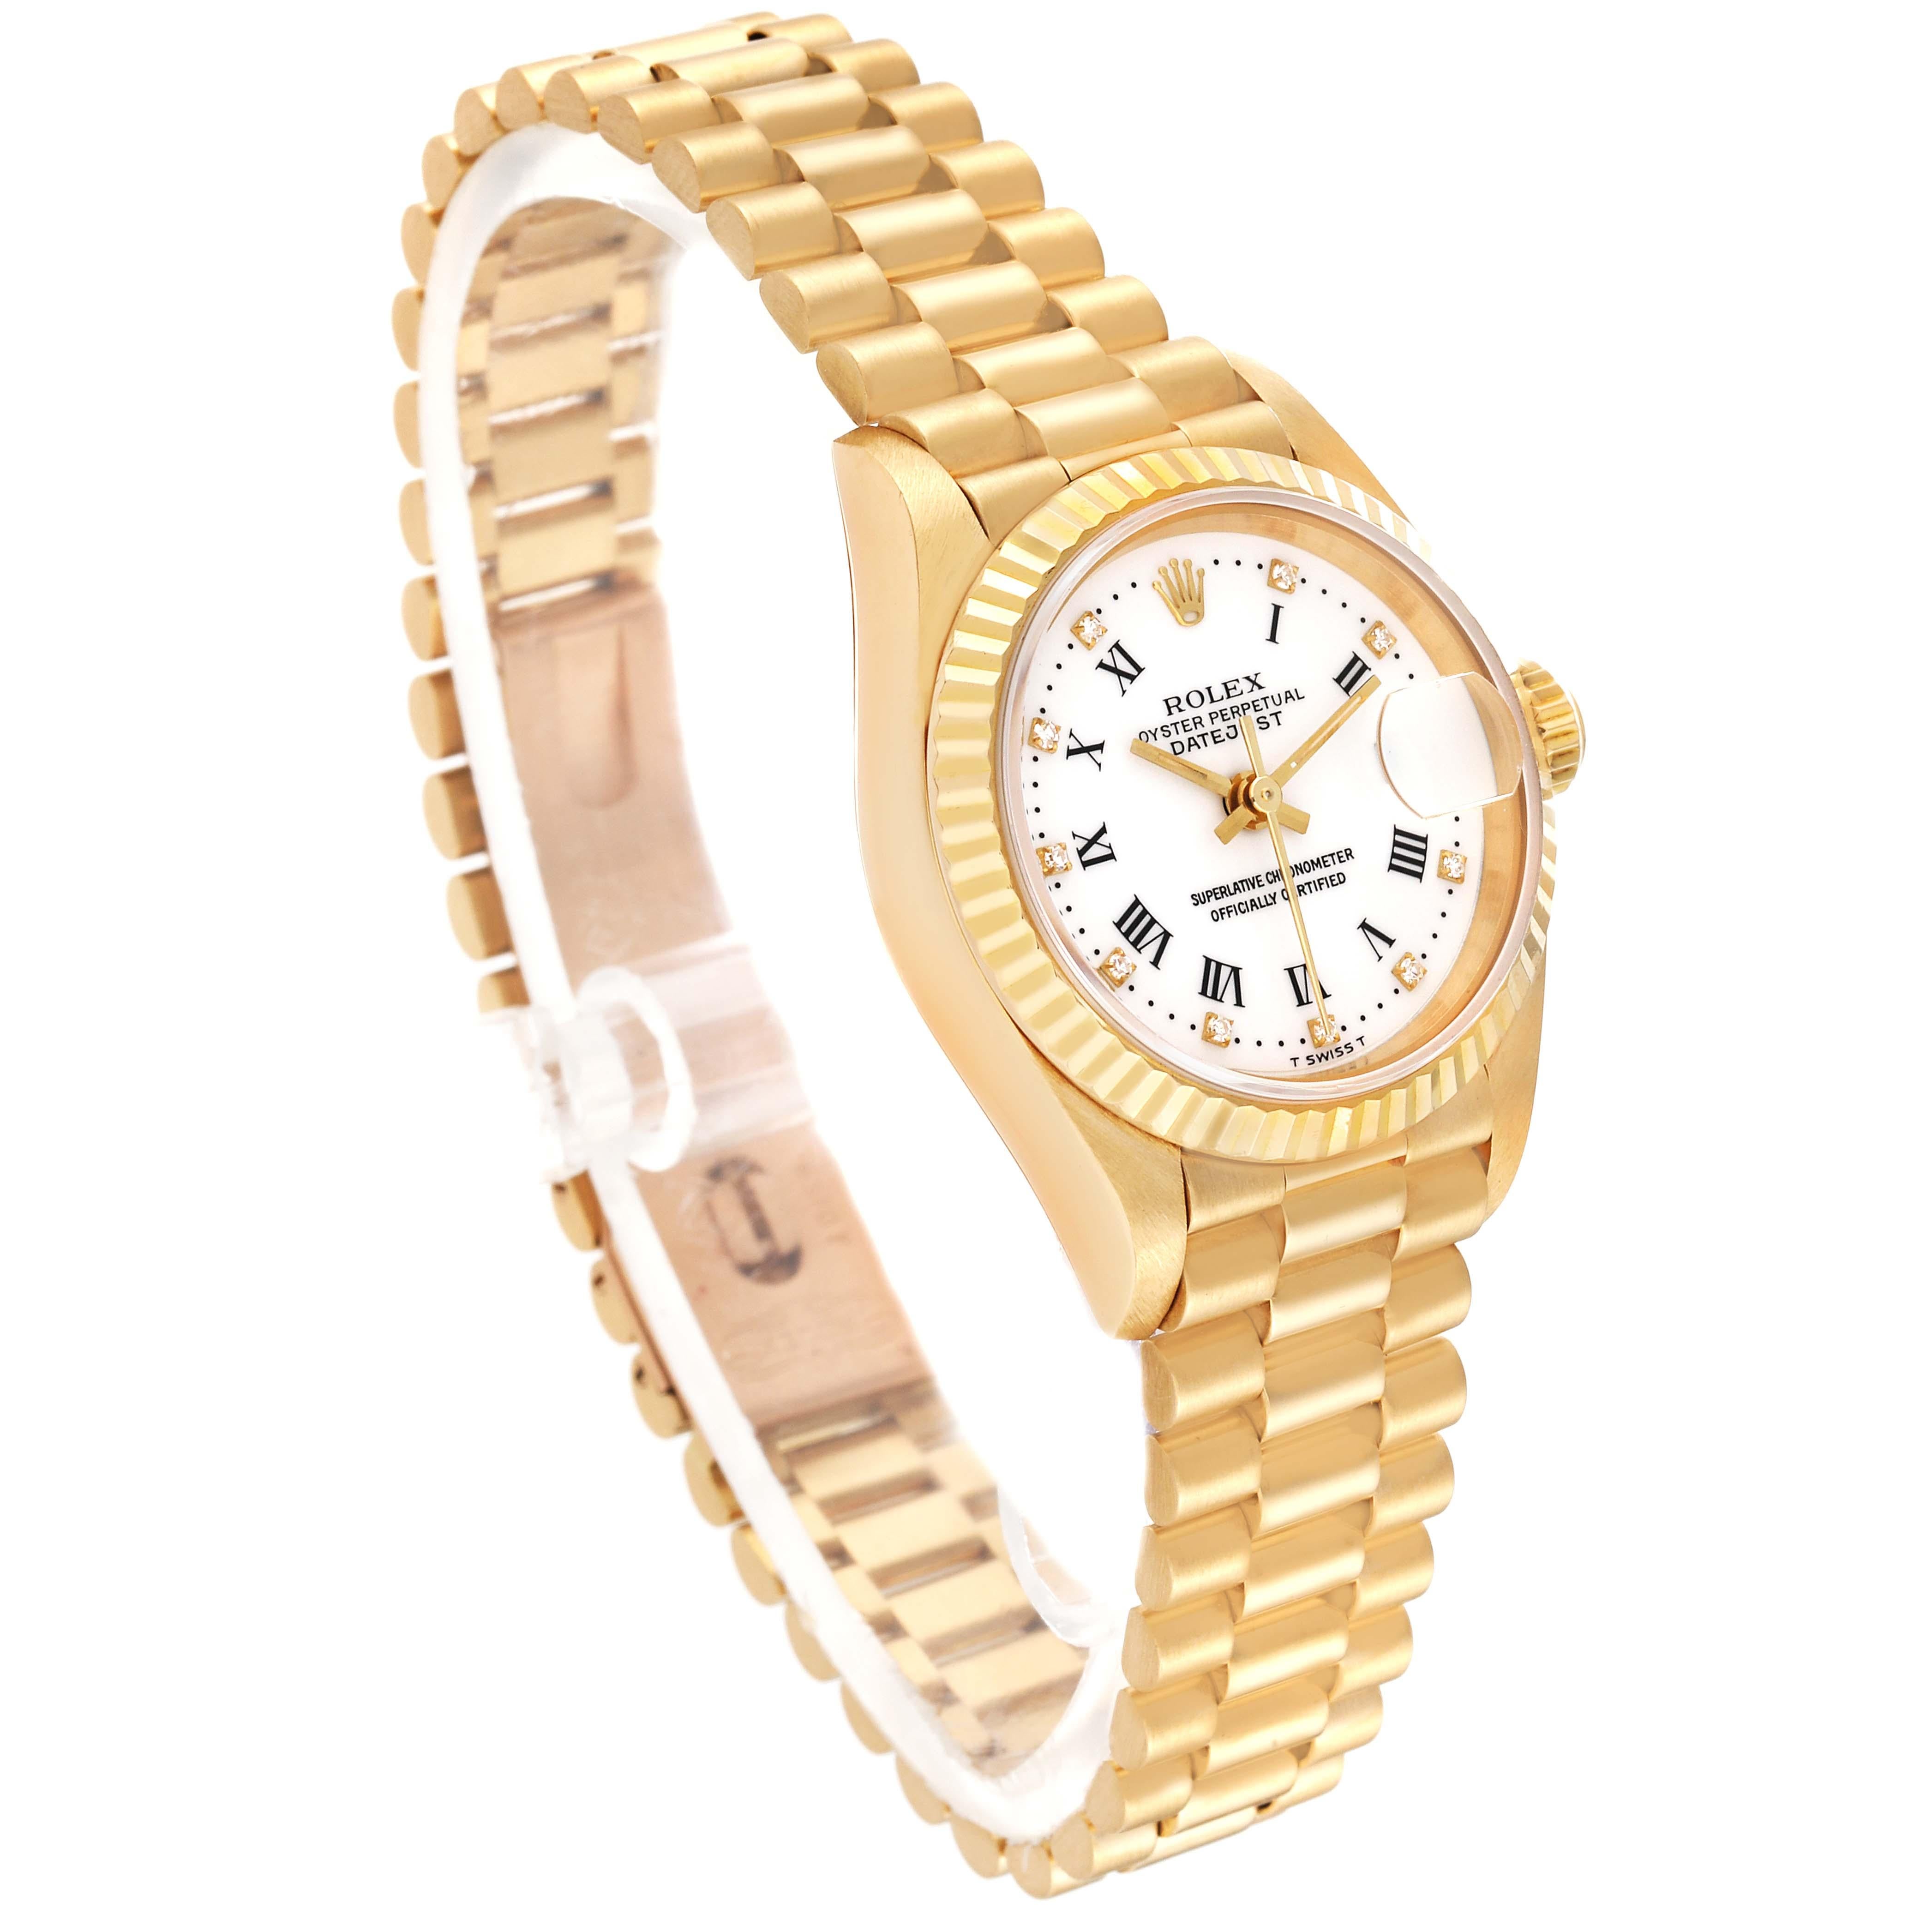 Rolex Datejust President Diamond Dial Yellow Gold Ladies Watch 69178 Box Papers 3